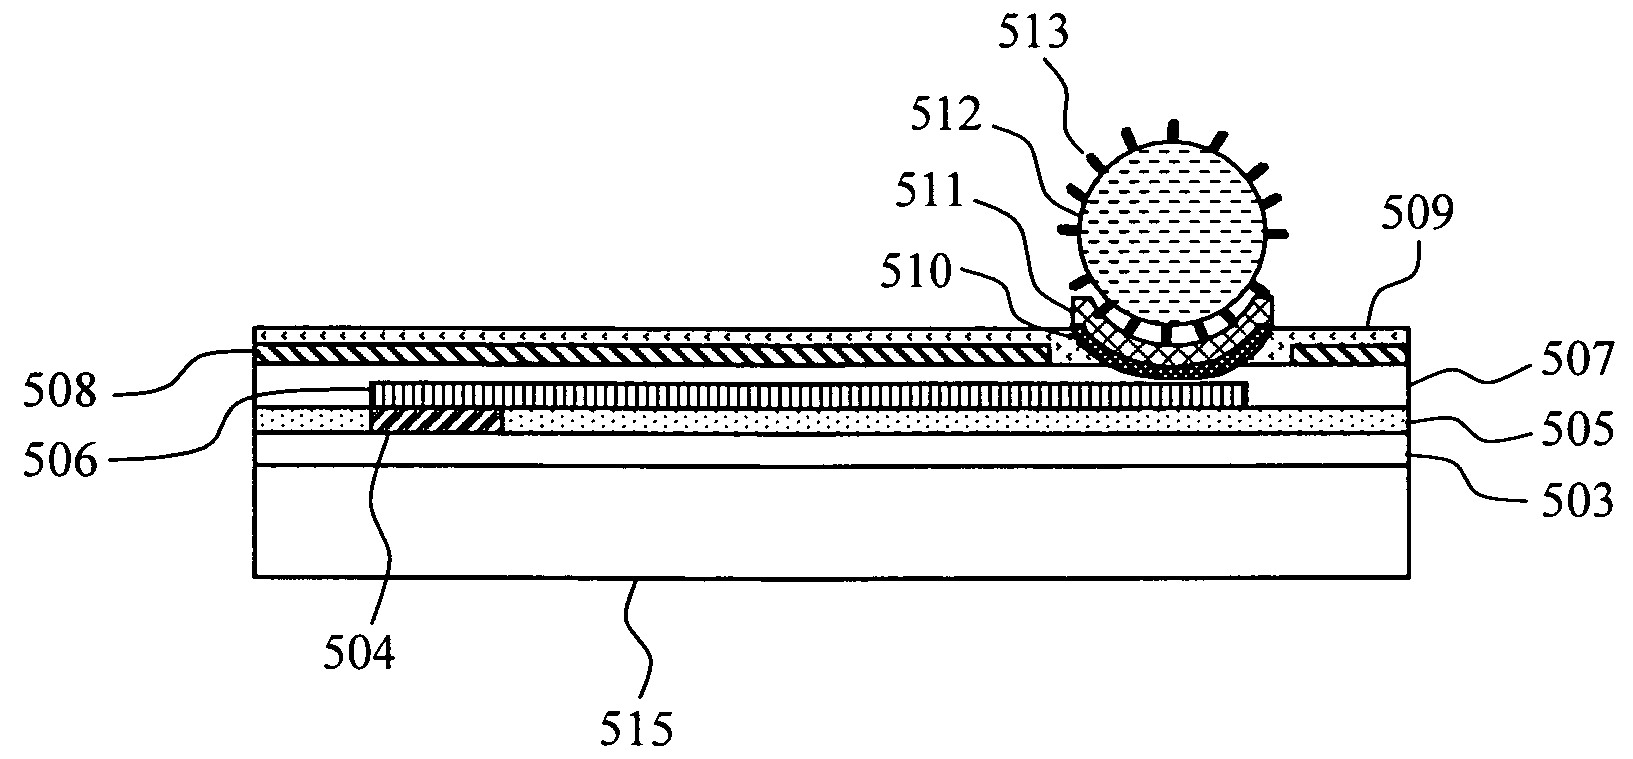 DNA measuring system and method